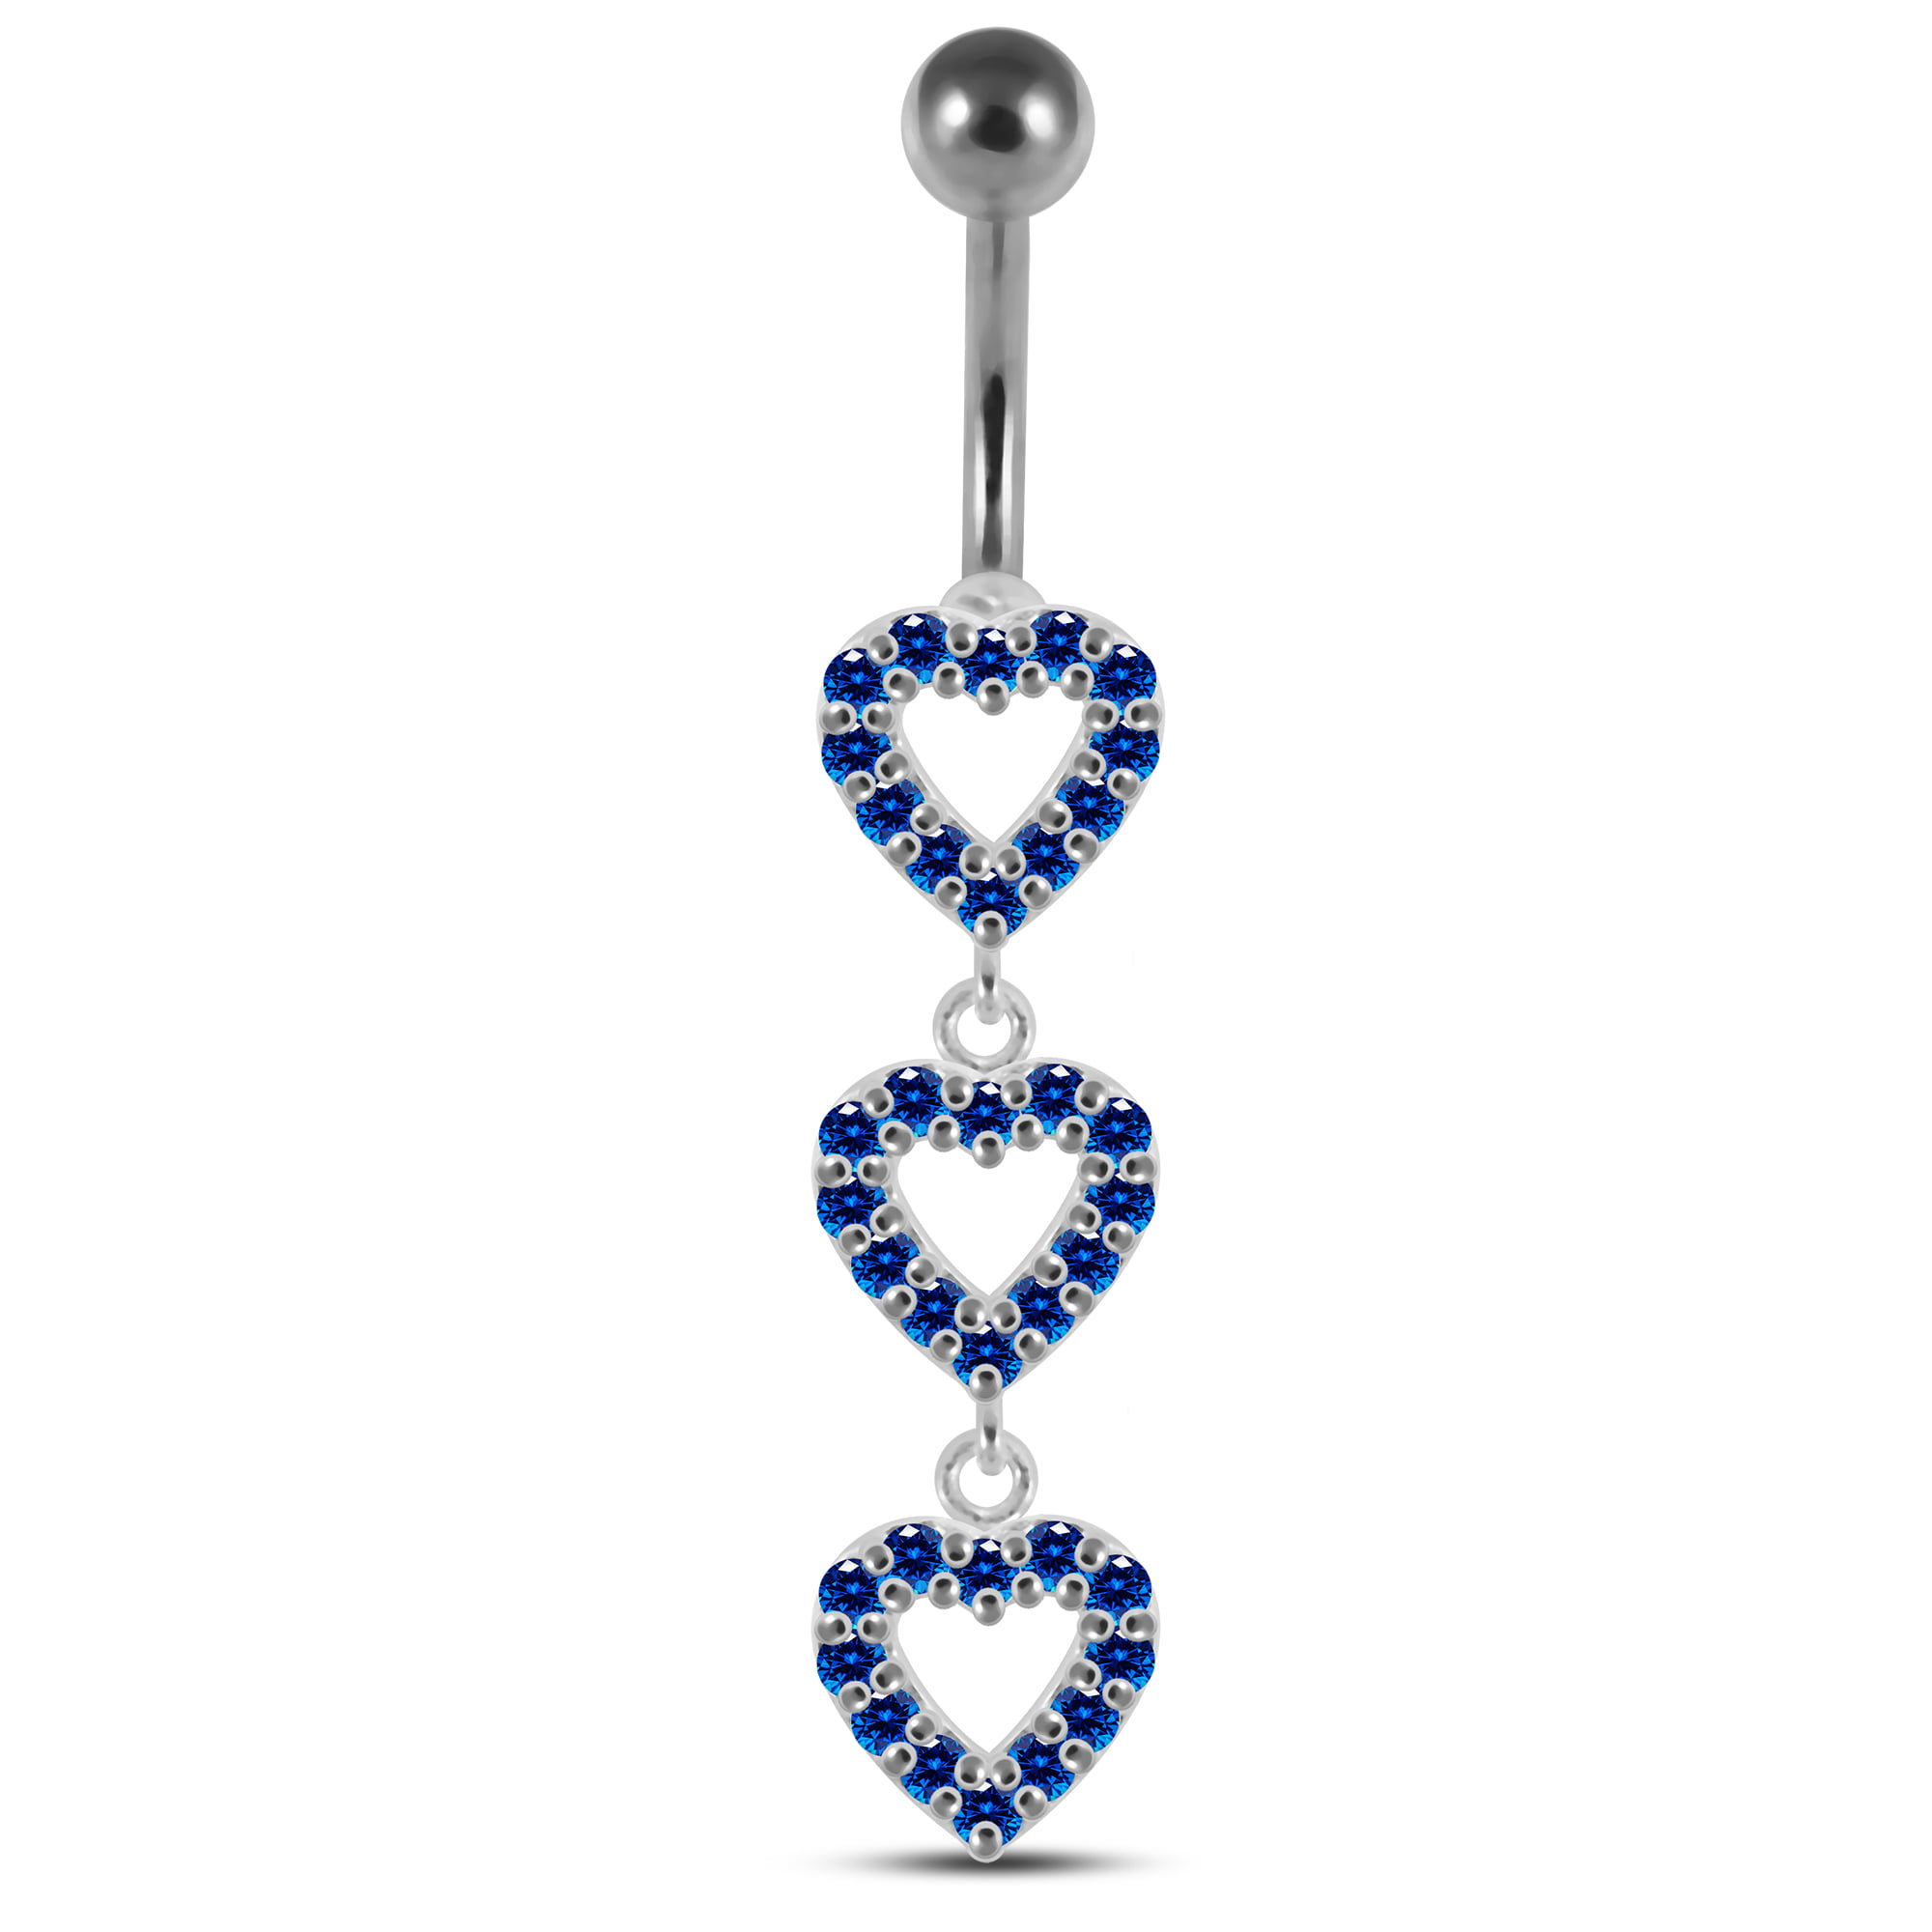 CZ Stone Triple Studded Heart Dangling Design 925 Sterling Silver Belly Button Piercing Ring Jewelry 